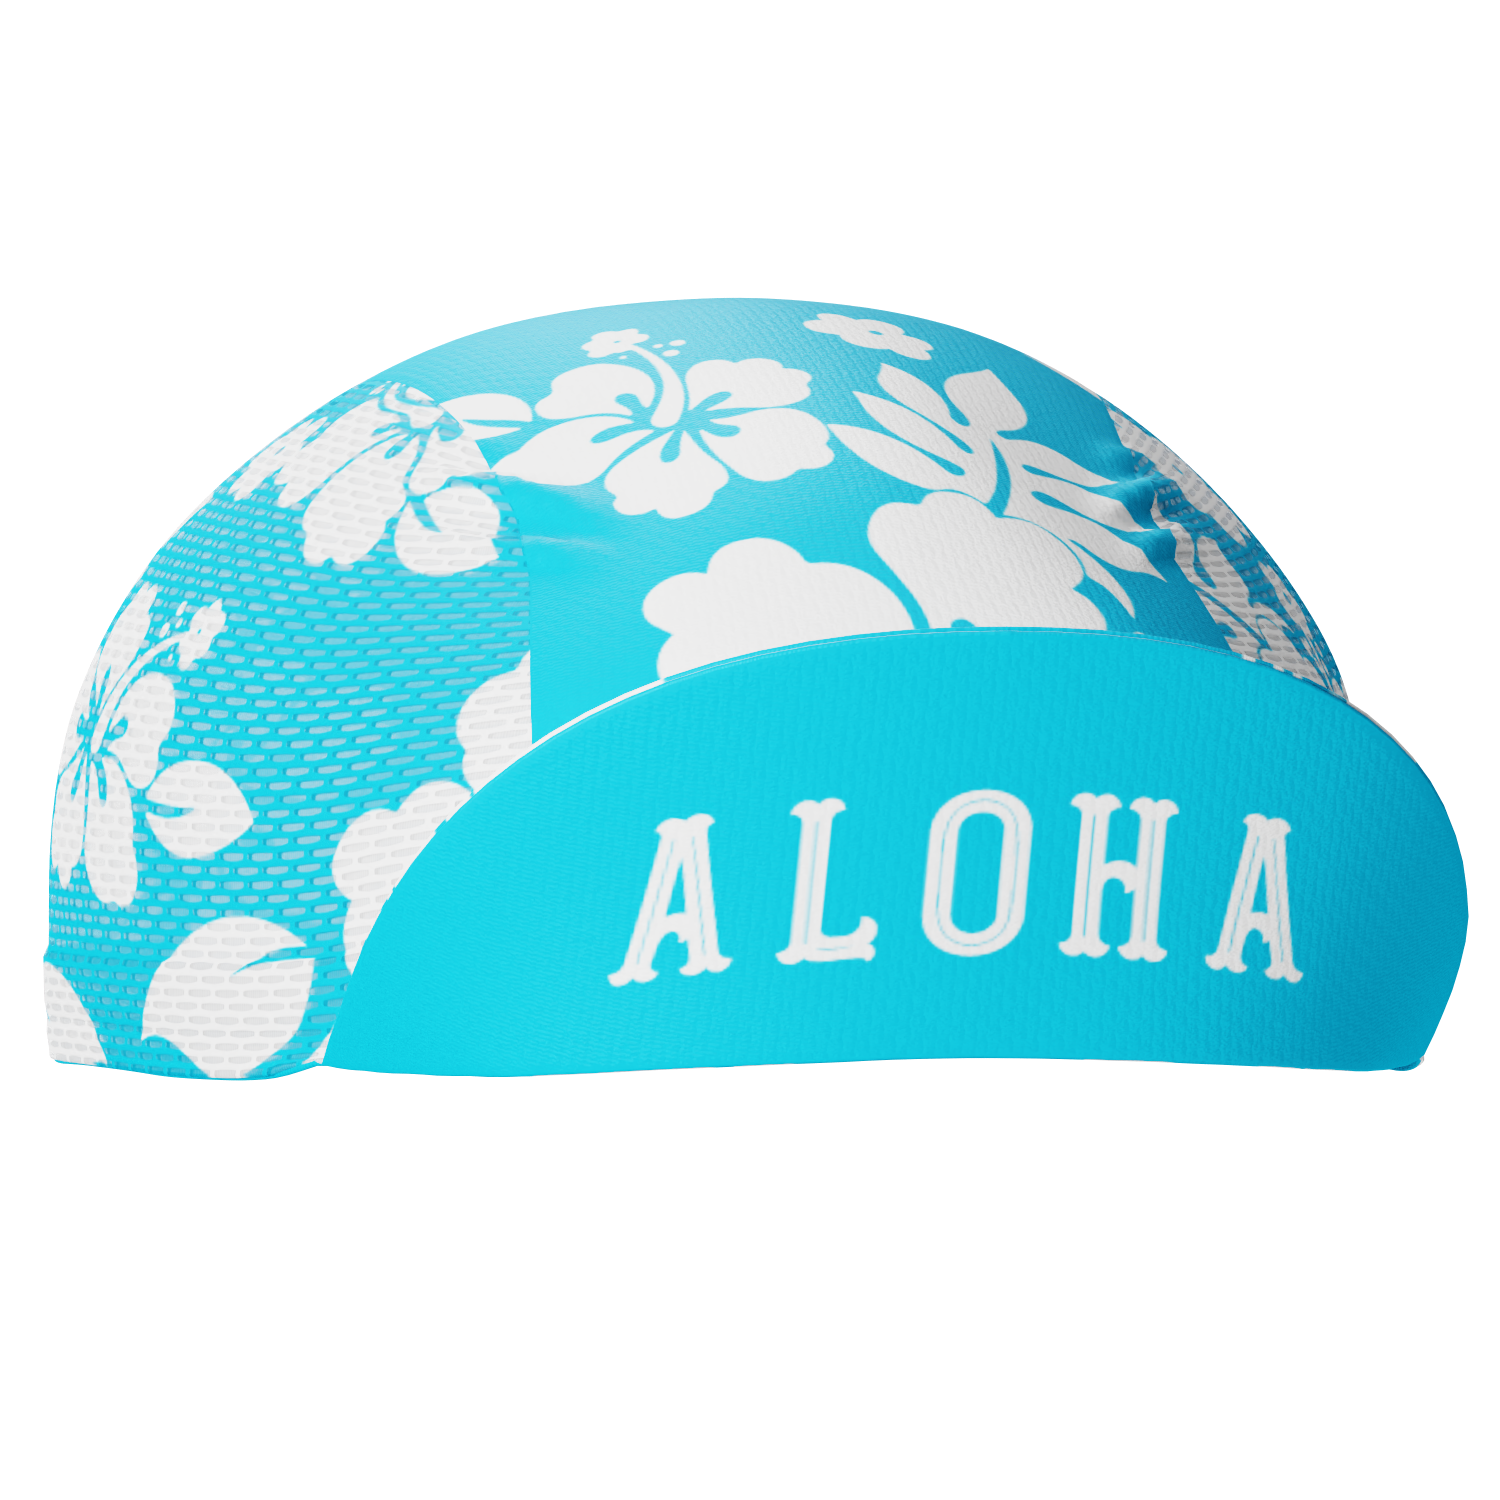 Red Hawaiian Hibiscus Quick-Dry Cycling Cap